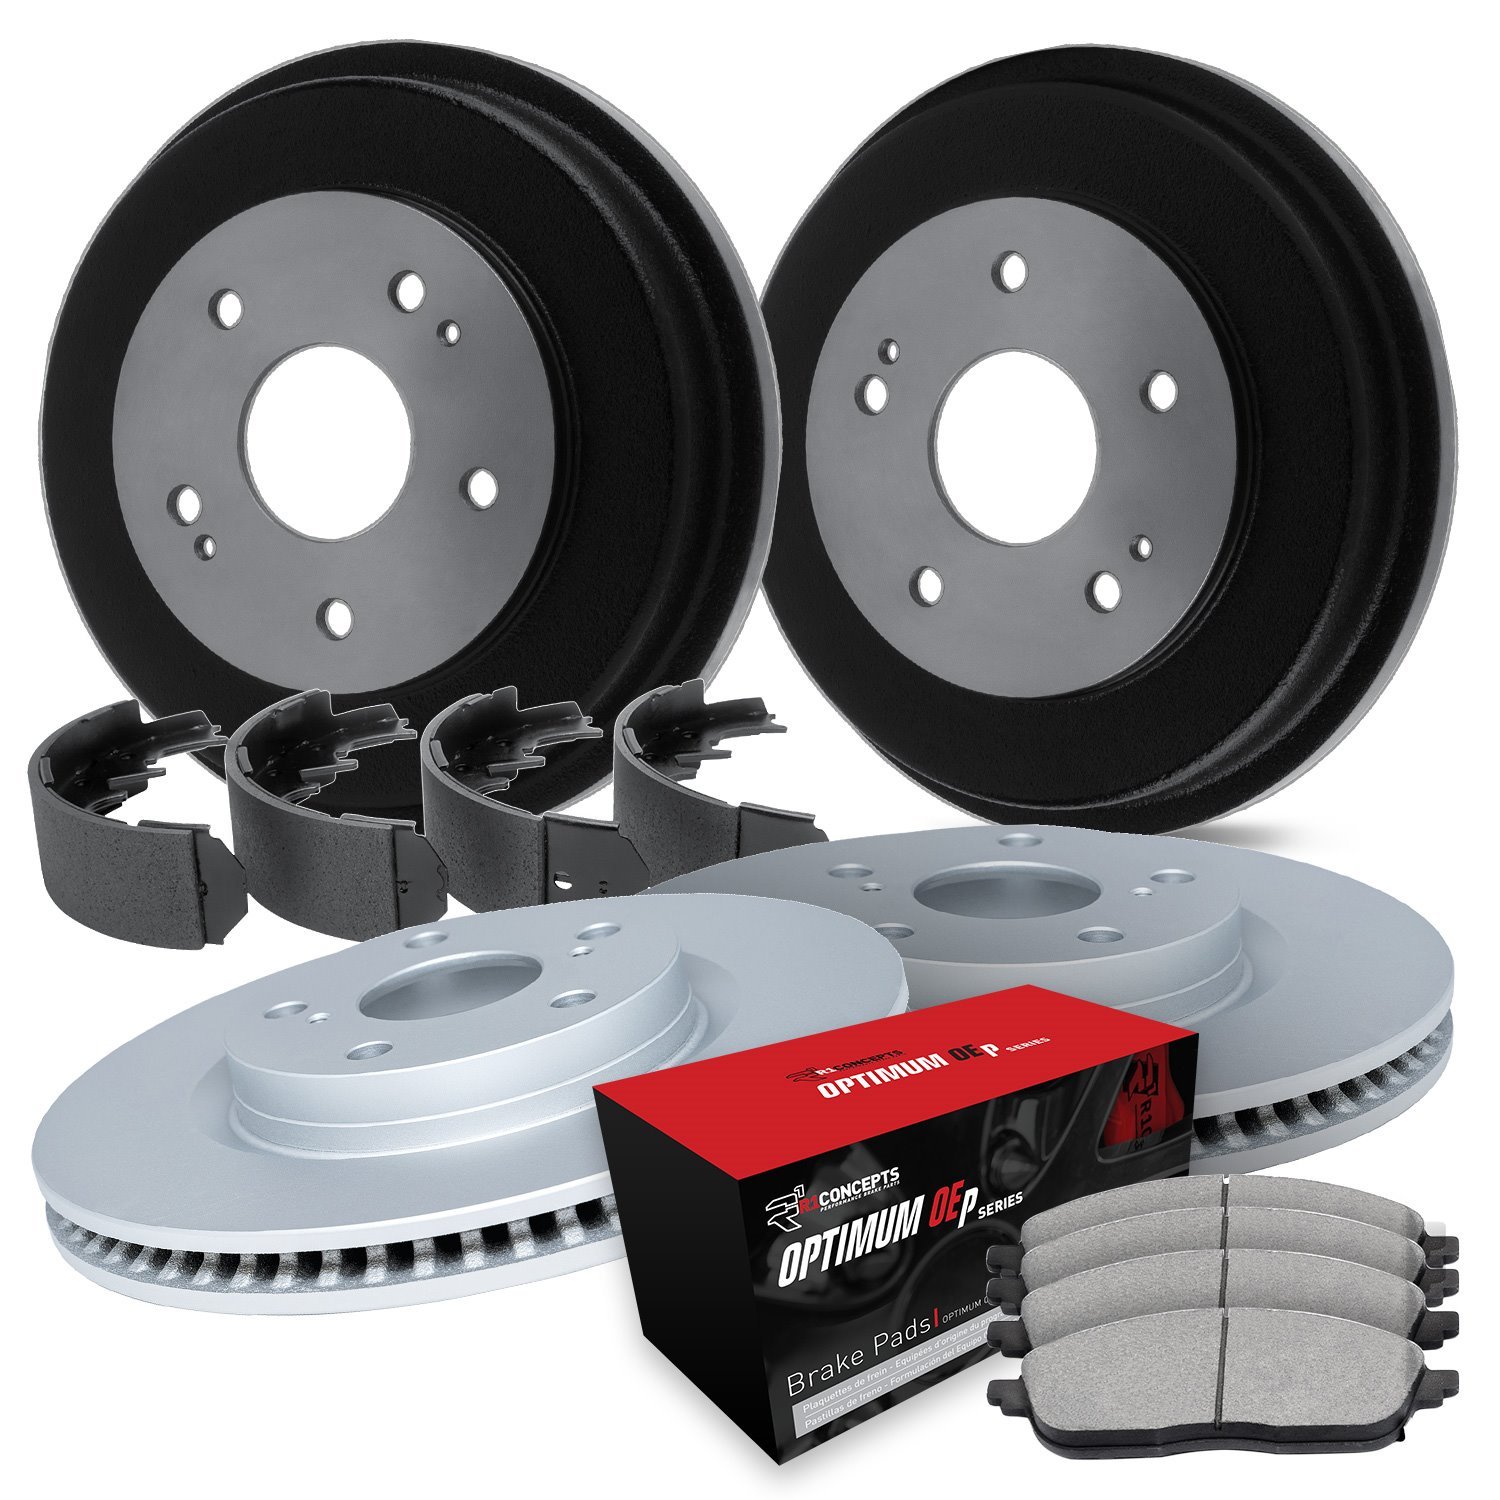 GEO-Carbon Brake Rotor & Drum Set w/Optimum OE Pads & Shoes, 2003-2004 Ford/Lincoln/Mercury/Mazda, Position: Front & Rear